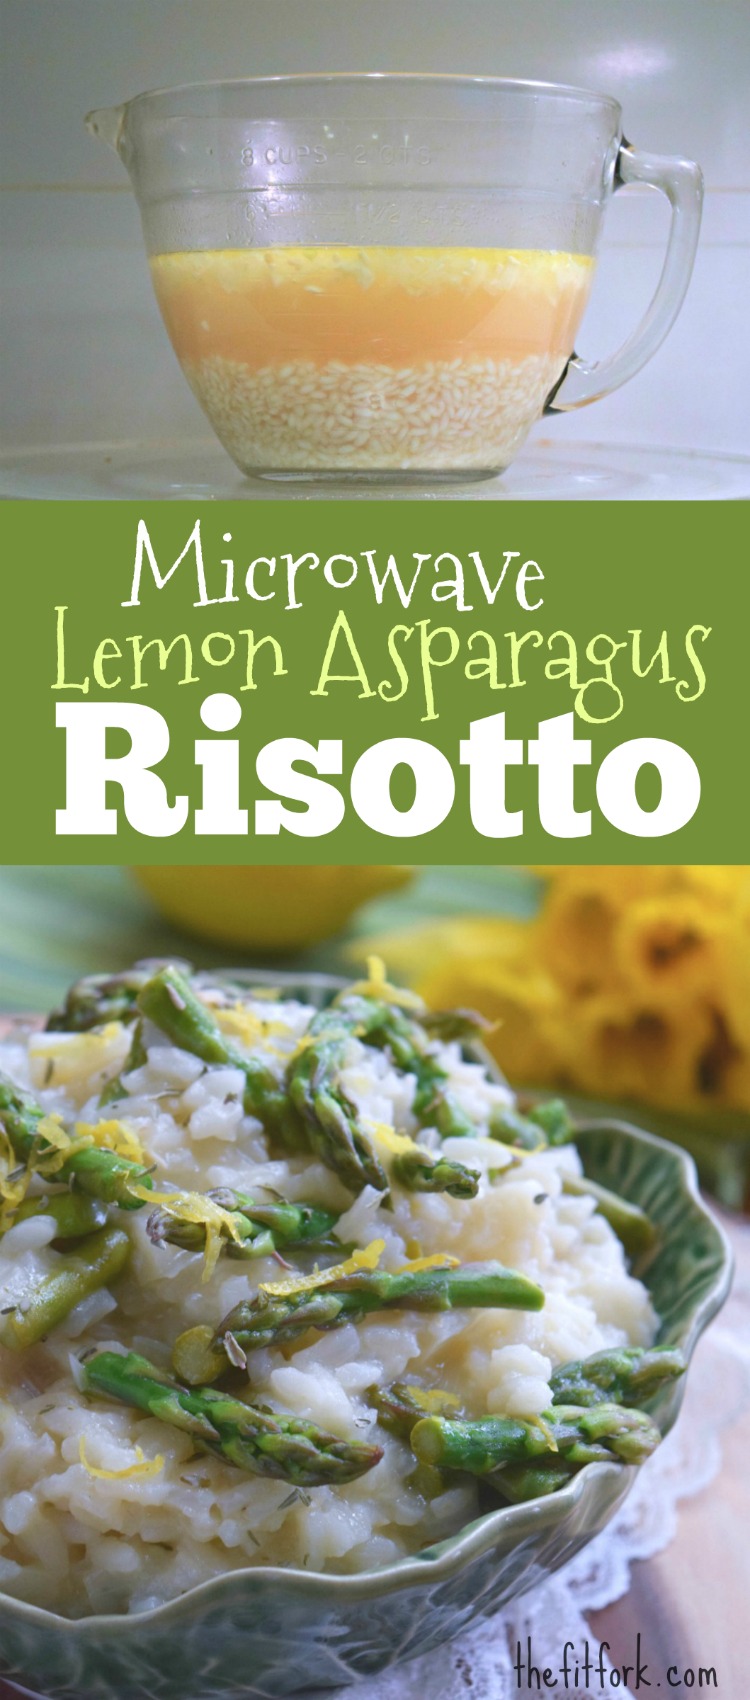 Microwave Lemon Asparagus Risotto makes a delicious, spring season side dish that can be prepared nearly hands-off, and in under 30 minutes -- so much less labor intensive than the traditional arborio rice recipe. A great side dish or entree on busy weeknights.